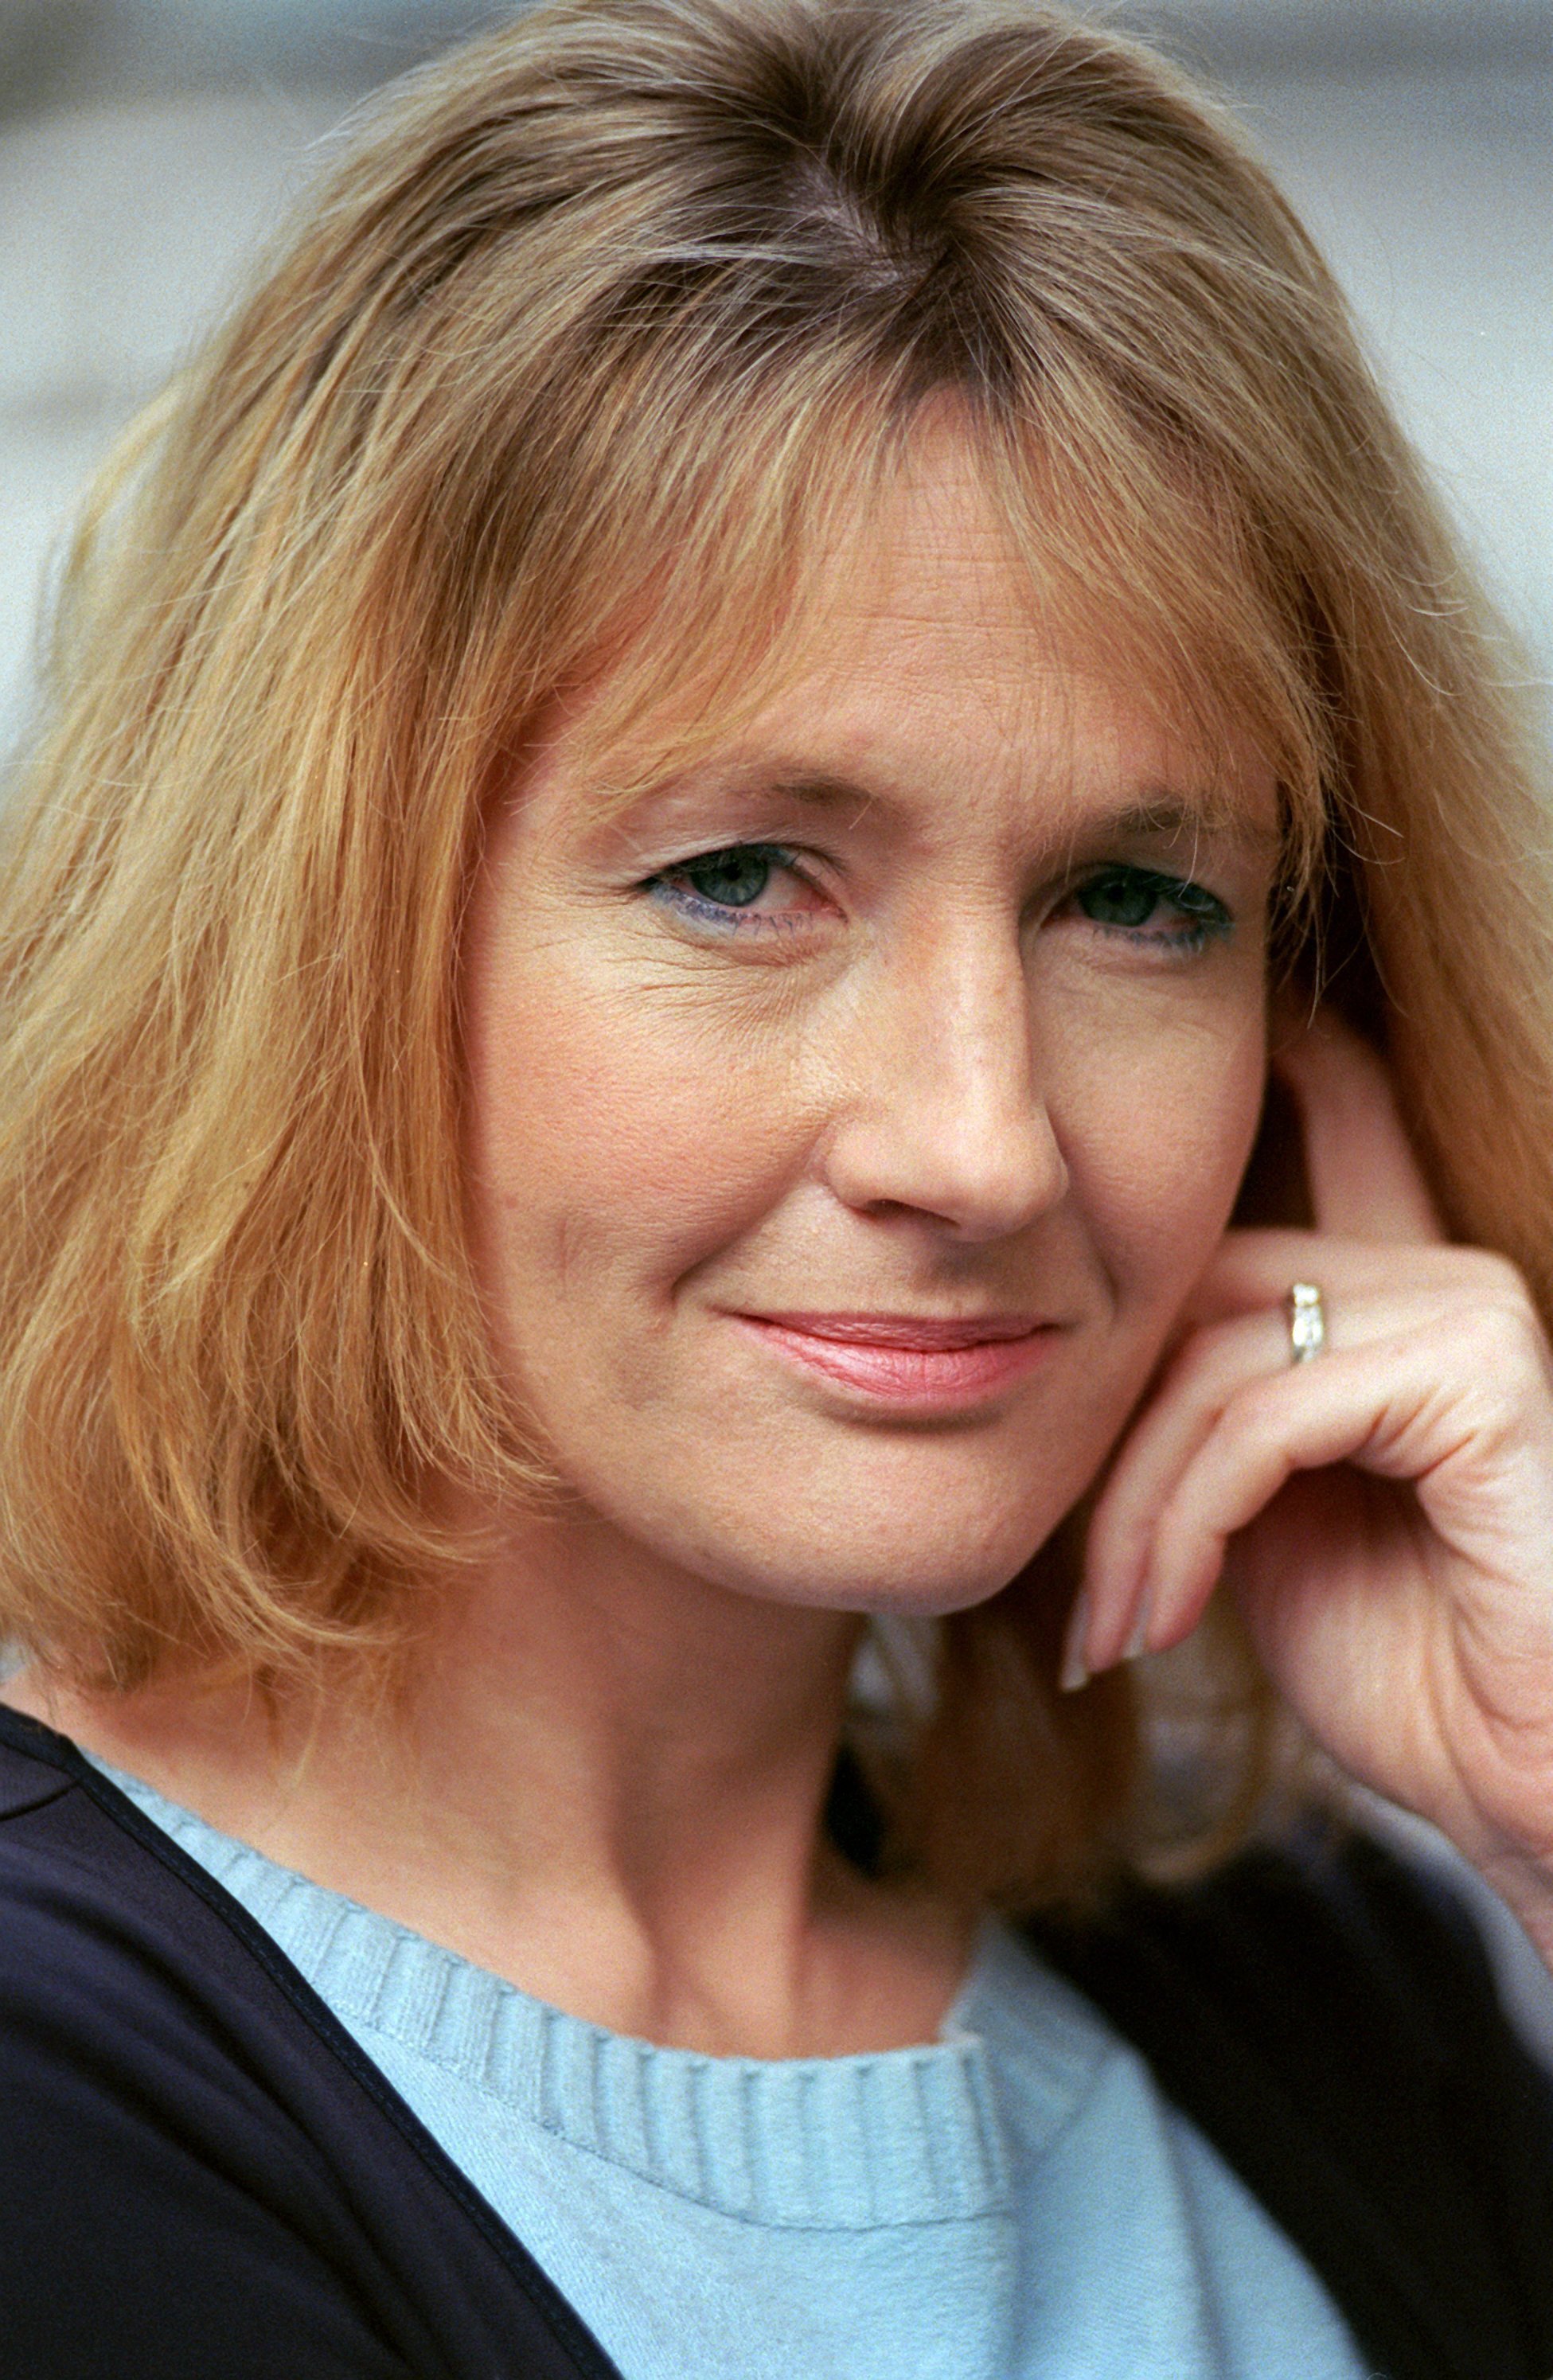  A photo of JK Rowling taken on March 20, 2000. | Source: Getty Images